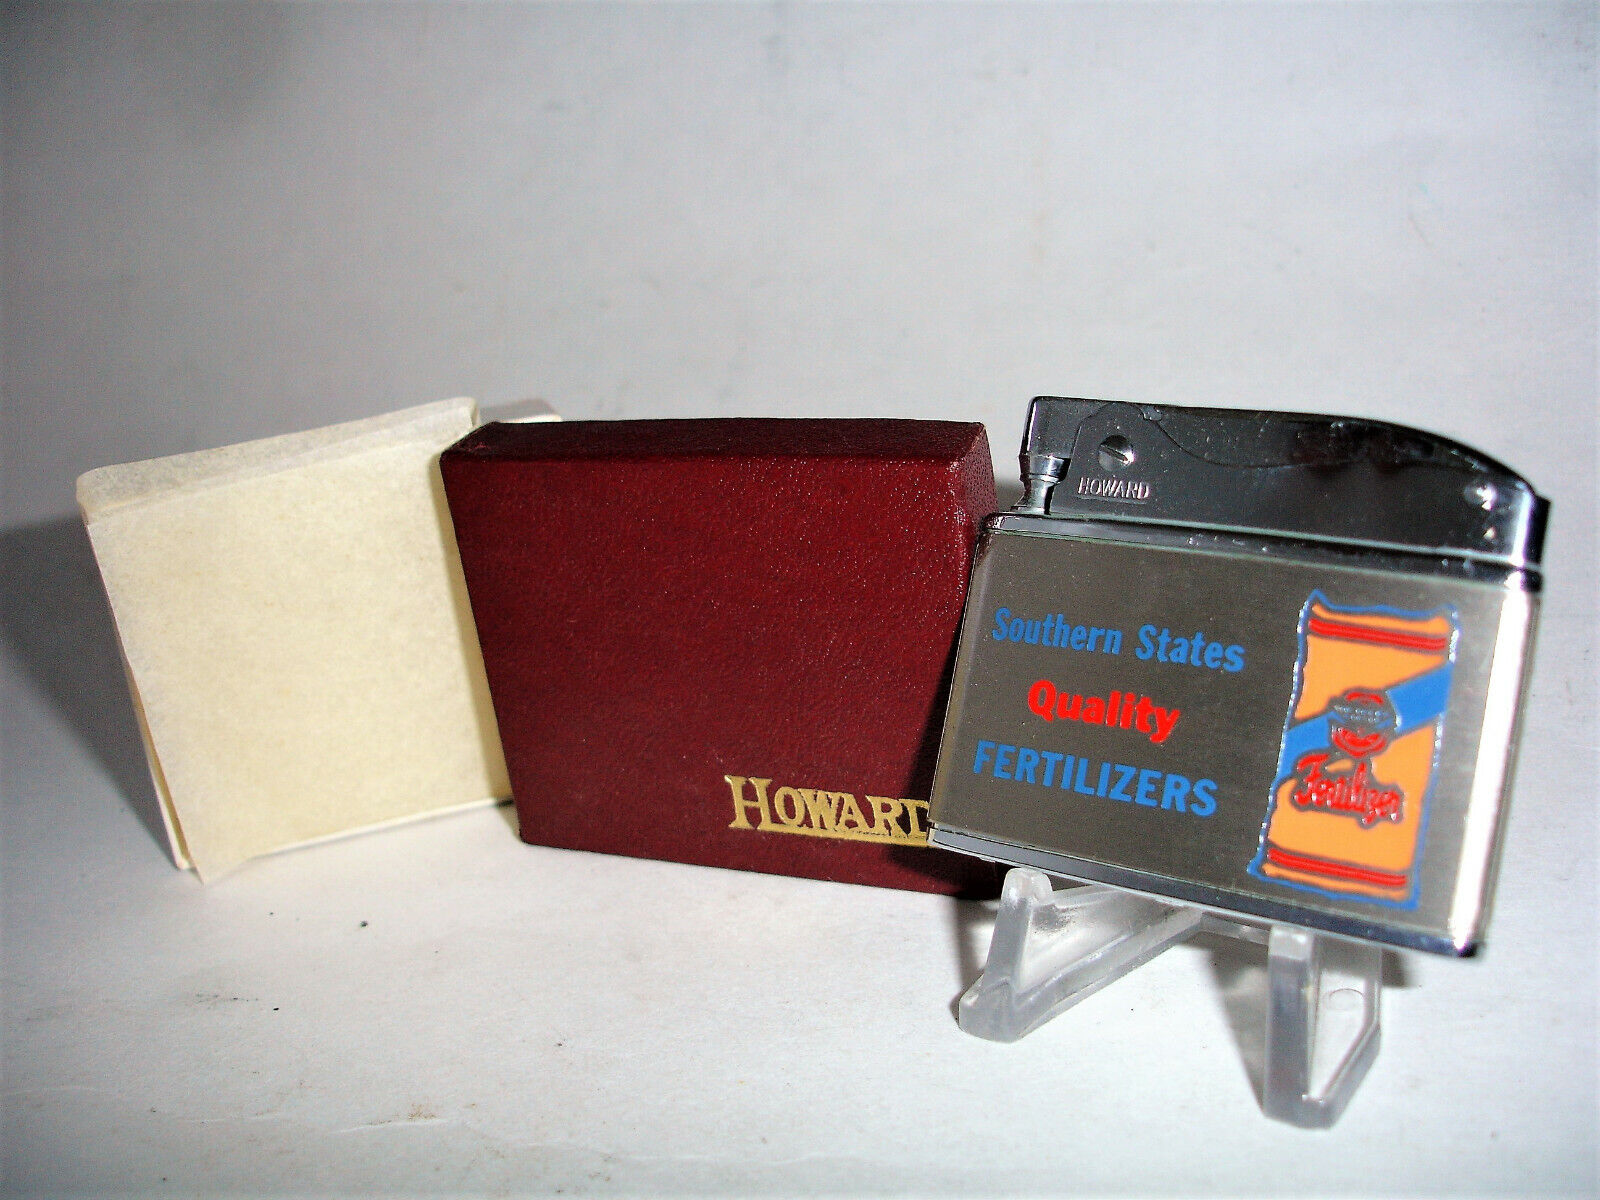  1960s SOUTHERN STATE QUALITY FERTILIZER Flat Advertising Lighter MINT in BOX KY